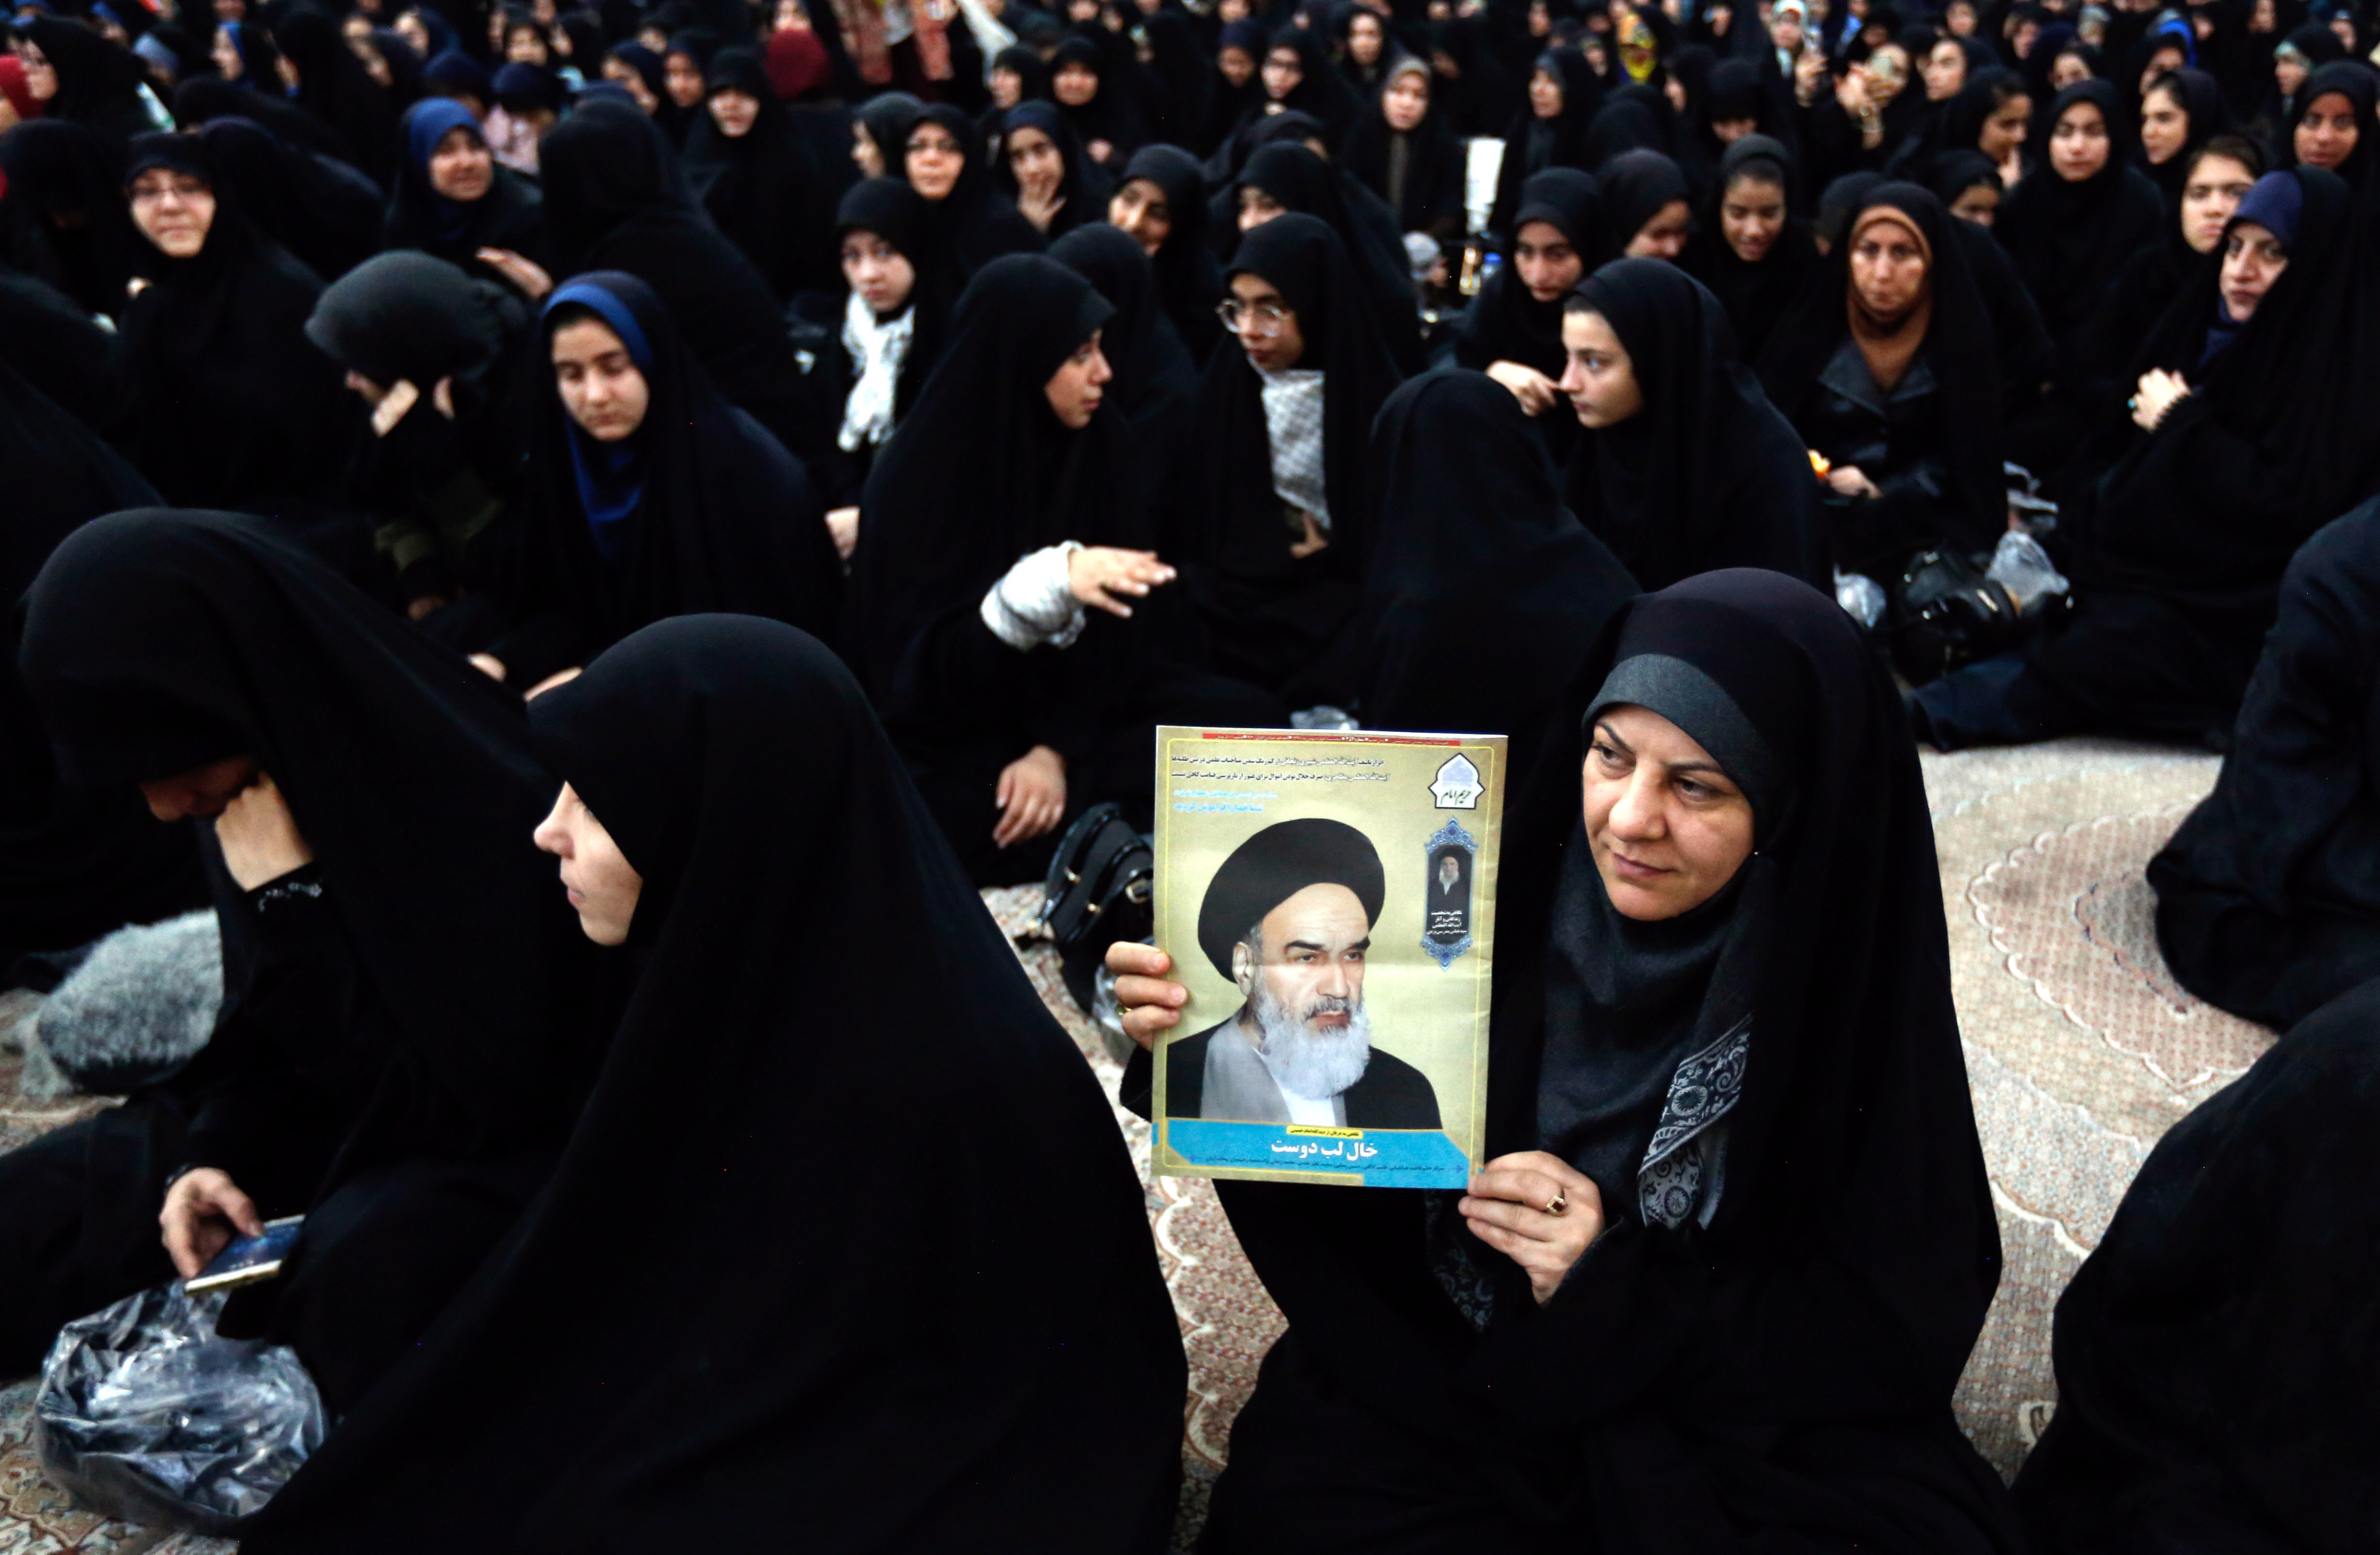 epa07335710 An Iranian woman holds a poster of Iran's late founder of the Islamic Republic, Ayatollah Ruhollah Khomeini on the occasion of the 40th anniversary of Khomeini's return from exile from Paris, at his mausoleum in southern Tehran, Iran, 01 February 2019. Iran will celebrate its 40th revolution anniversary on 11 February 2019.  EPA/ABEDIN TAHERKENAREH